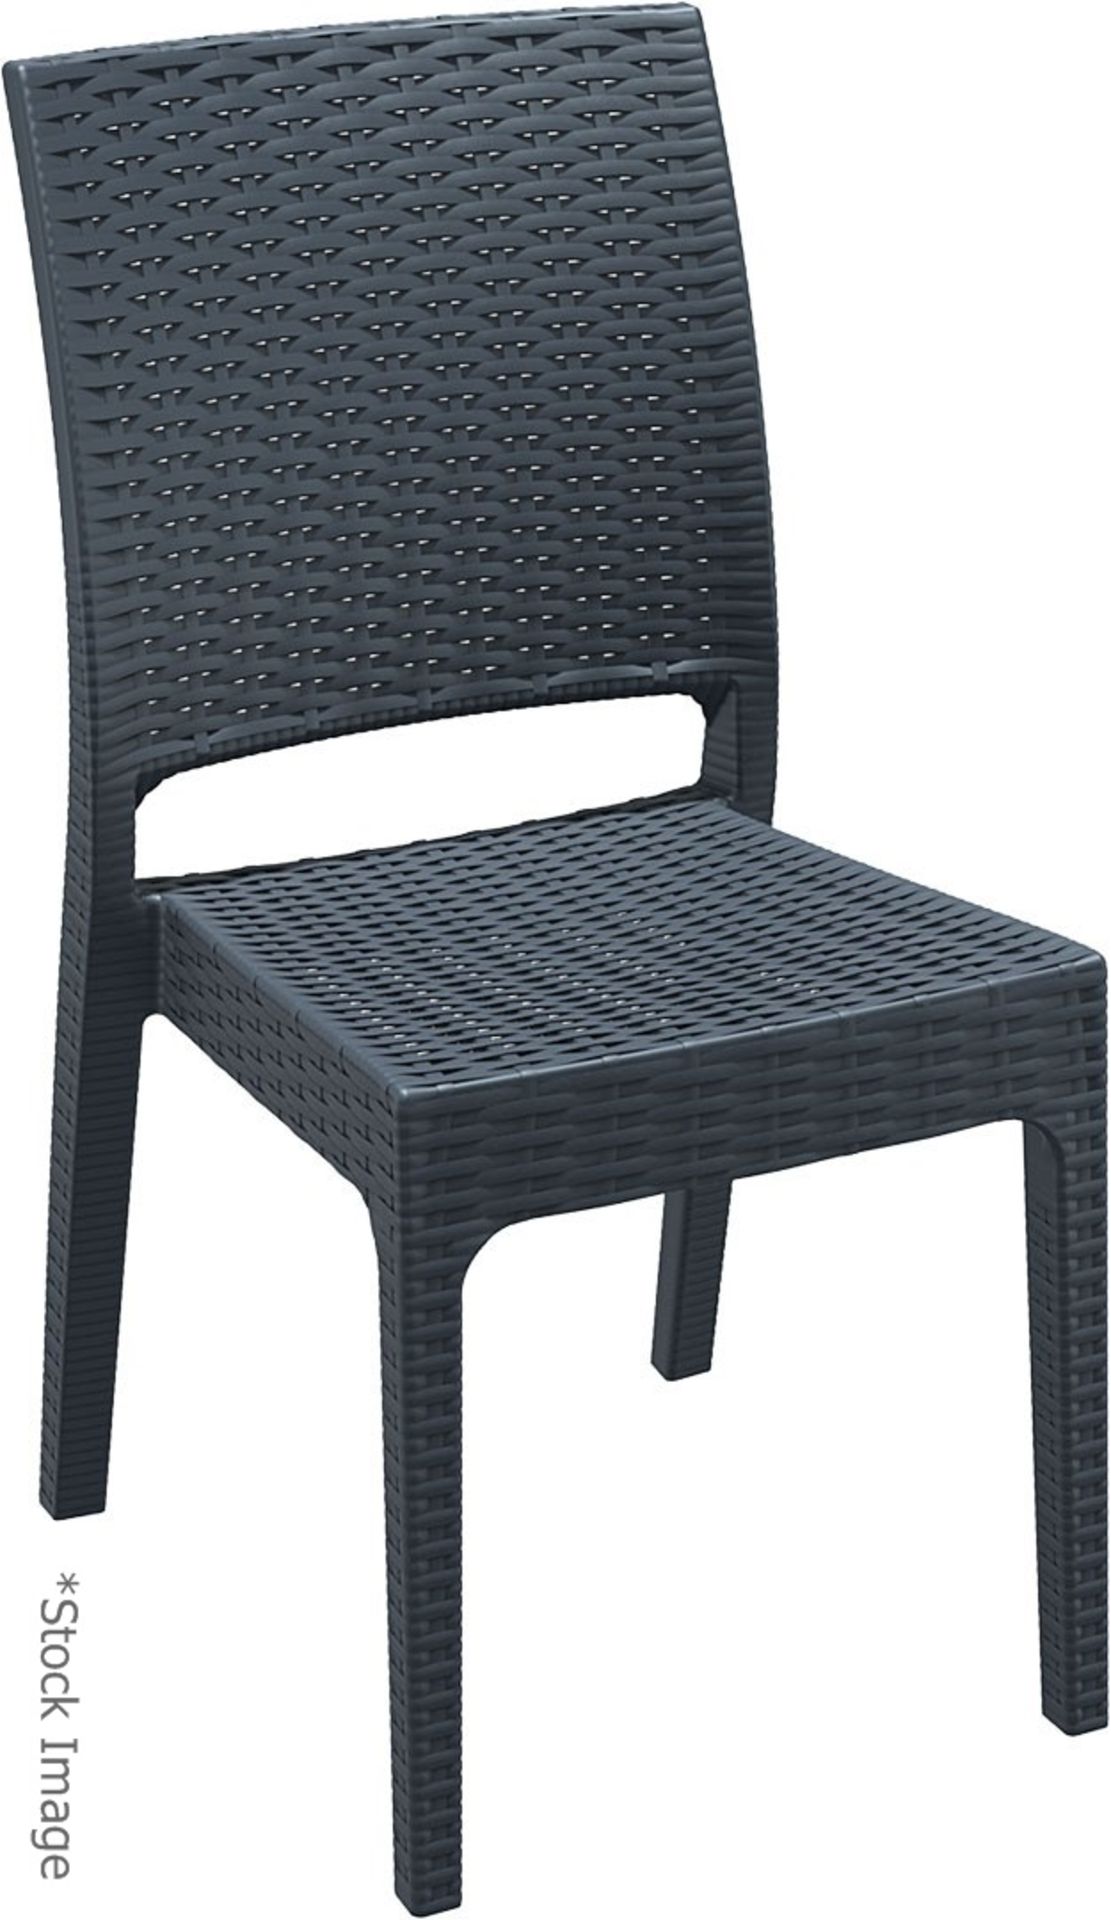 8 x SIESTA EXCLUSIVE 'Florida' Commercial Stackable Rattan-style Chairs In Dark Grey -CL987 - - Image 13 of 13